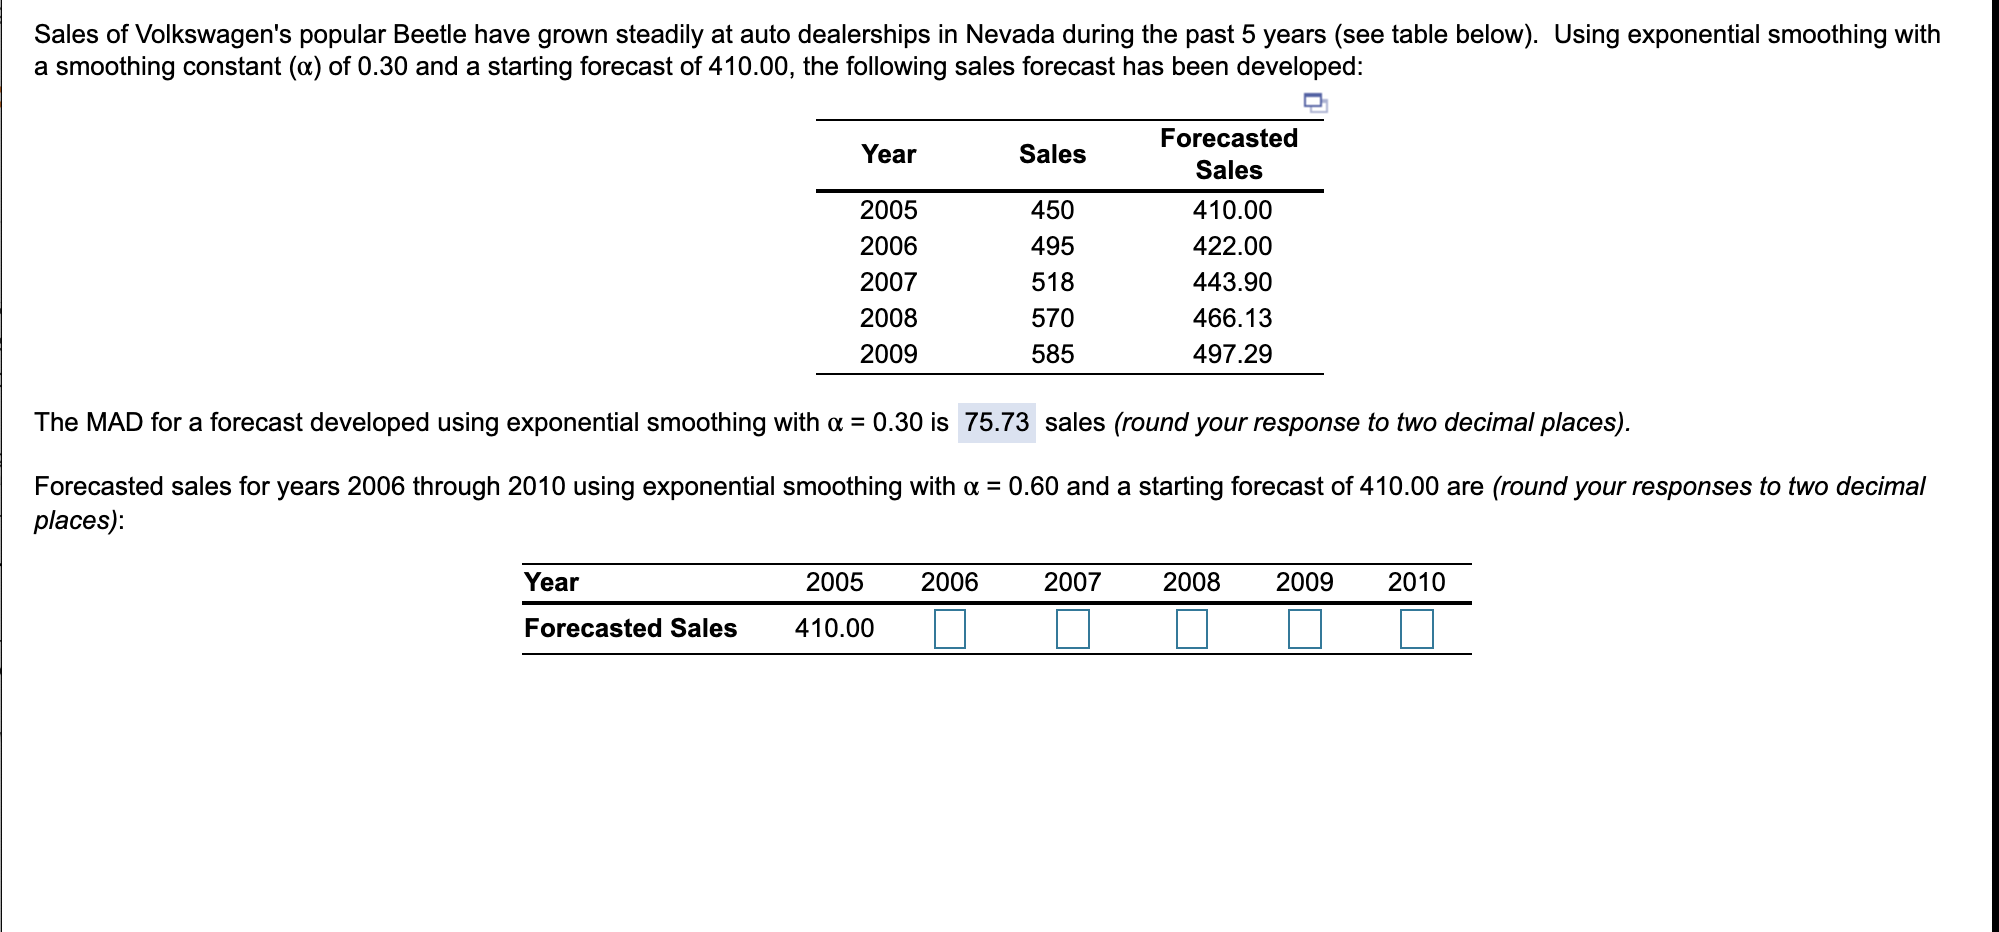 Sales of Volkswagen's popular Beetle have grown steadily at auto dealerships in Nevada during the past 5 years (see table below). Using exponential smoothing with
a smoothing constant (a) of 0.30 and a starting forecast of 410.00, the following sales forecast has been developed:
Forecasted
Year
Sales
Sales
2005
450
410.00
2006
495
422.00
2007
518
443.90
2008
570
466.13
2009
585
497.29
The MAD for a forecast developed using exponential smoothing with a = 0.30 is 75.73 sales (round your response to two decimal places).
Forecasted sales for years 2006 through 2010 using exponential smoothing with a = 0.60 and a starting forecast of 410.00 are (round your responses to two decimal
places):
Year
2005
2006
2007
2008
2009
2010
Forecasted Sales
410.00
